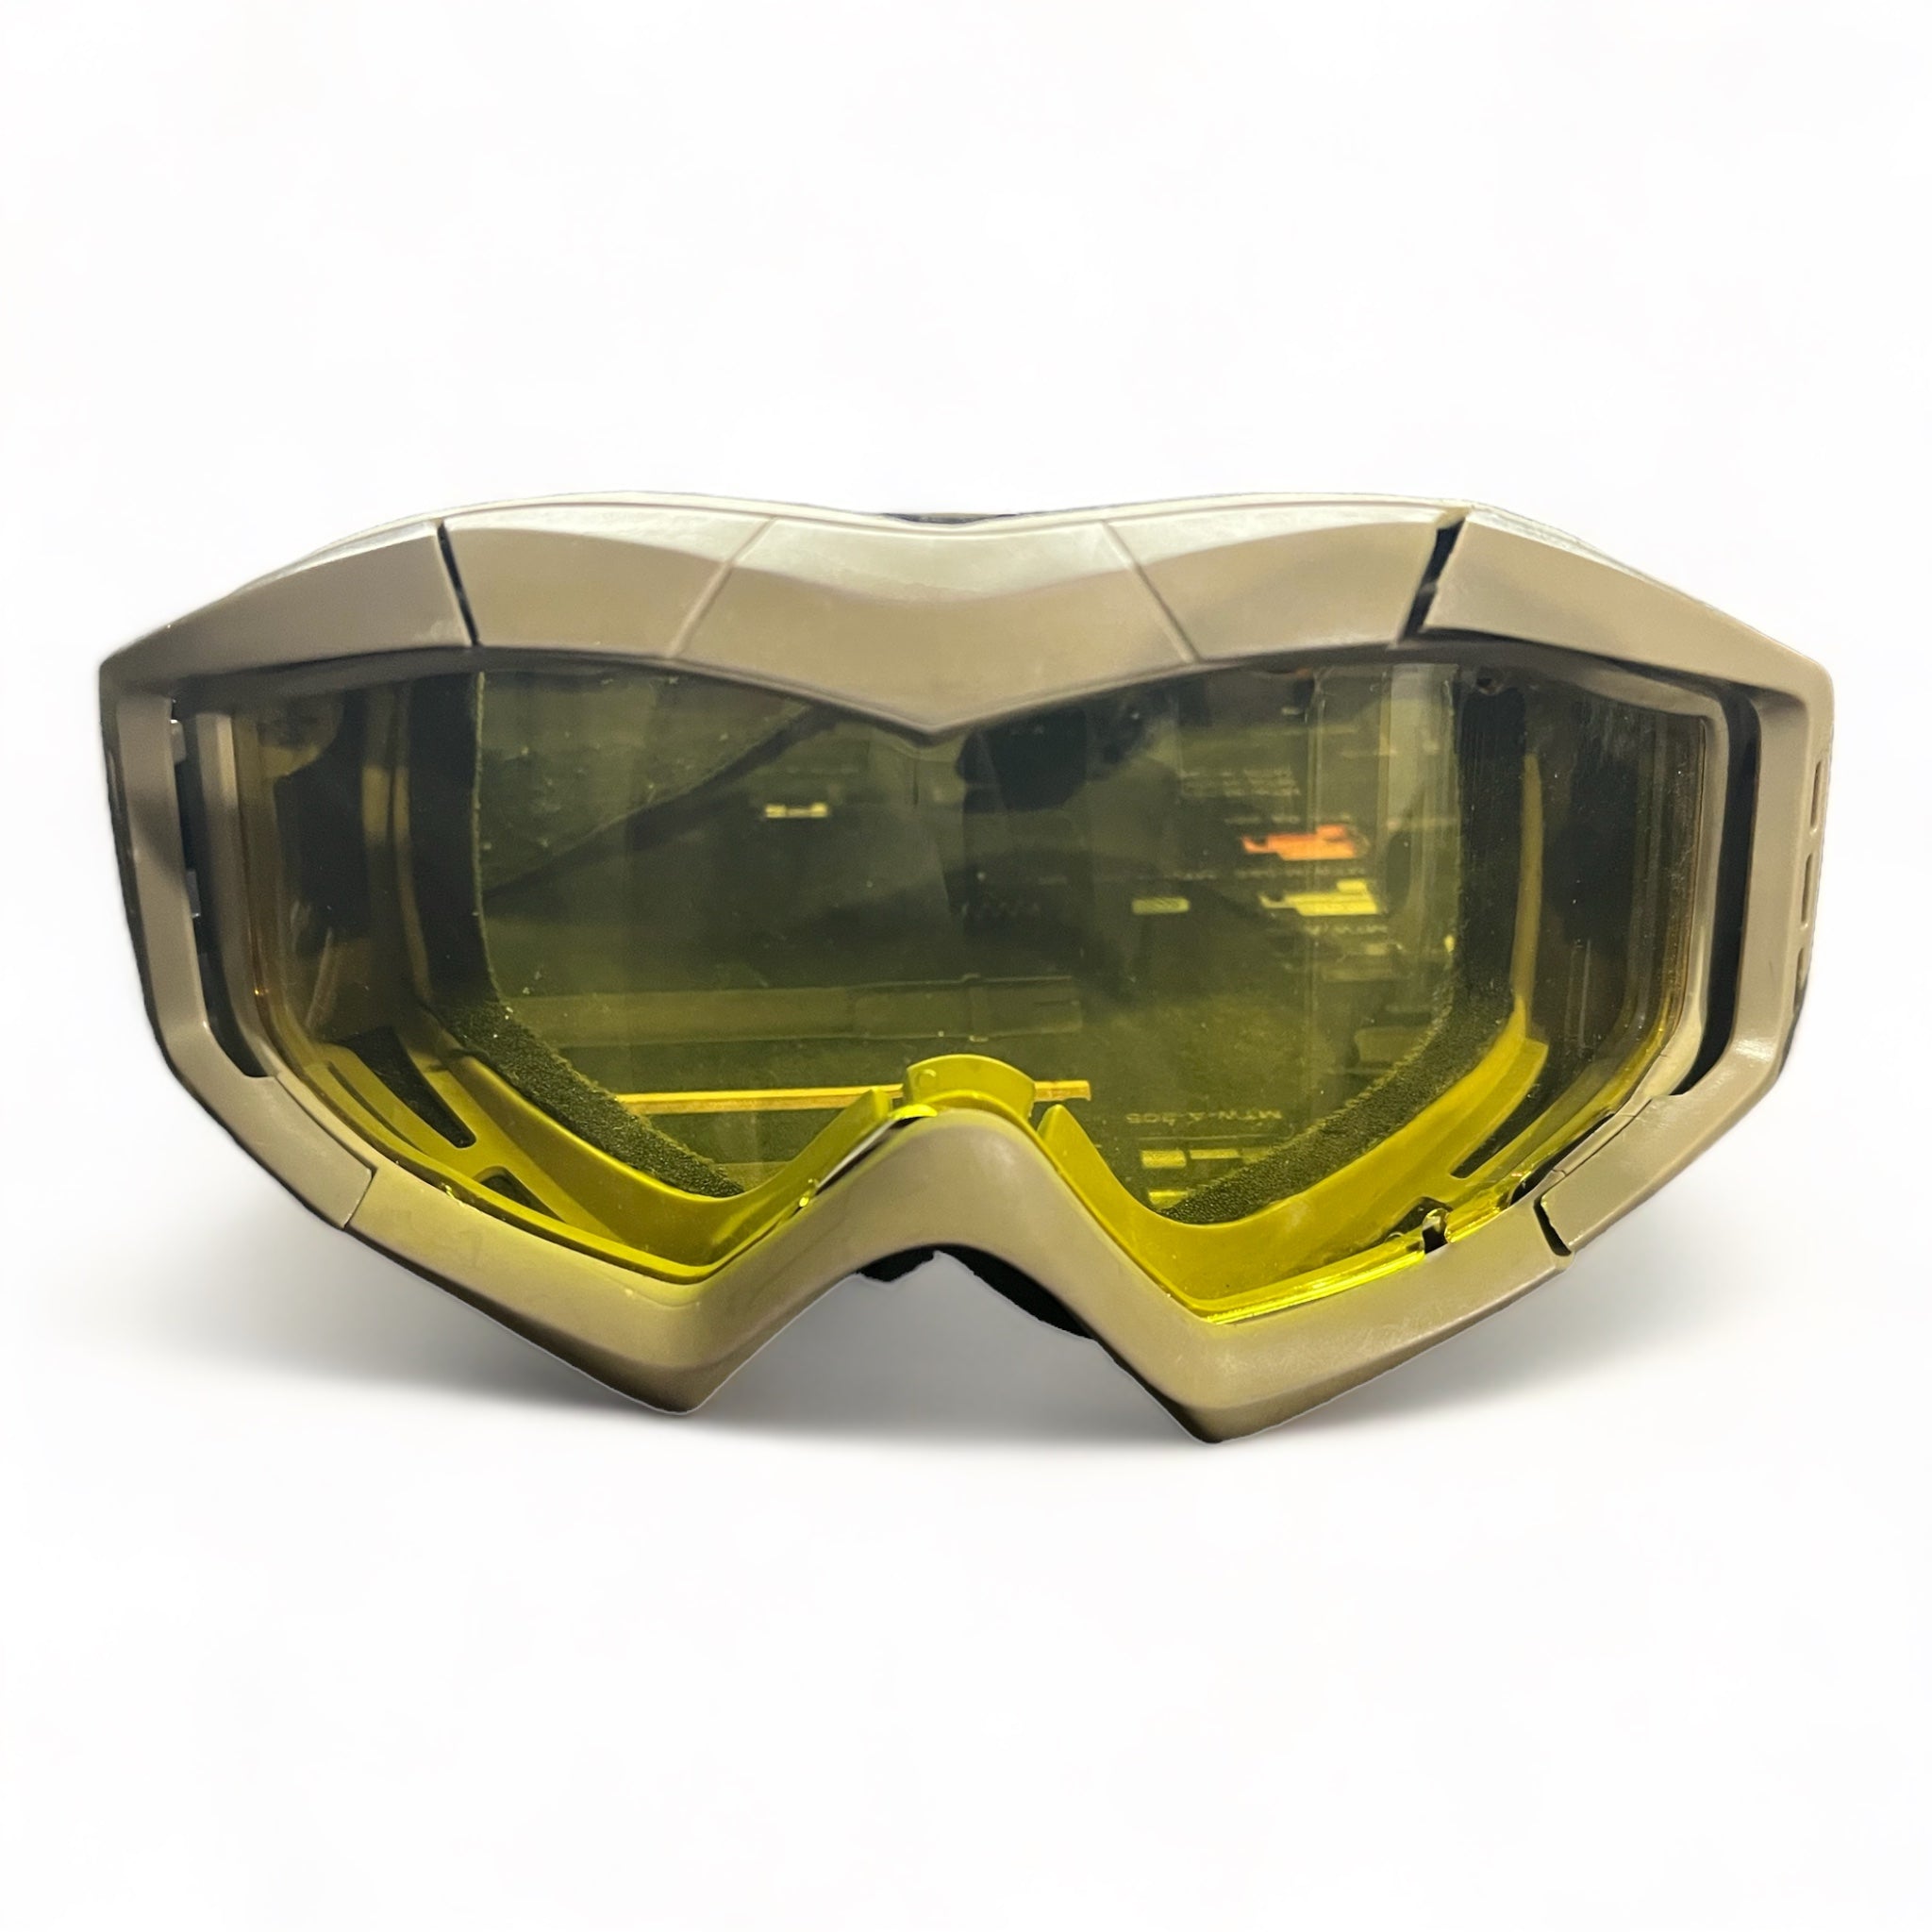 (Used) Full Seal Airsoft Goggles (Tan/Yellow Len)